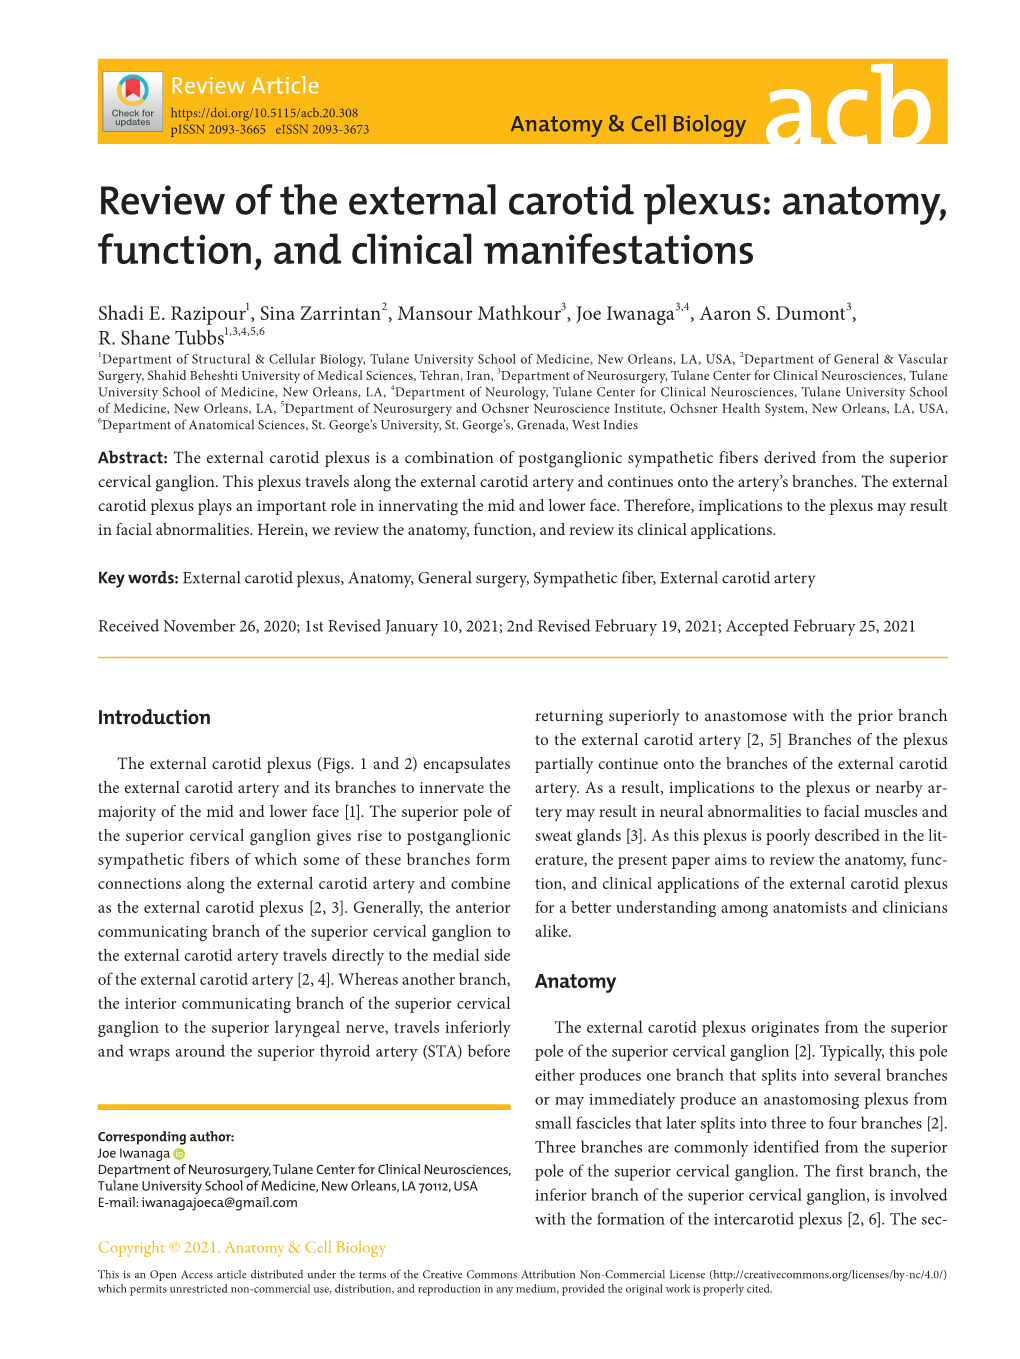 Review of the External Carotid Plexus: Anatomy, Function, and Clinical Manifestations